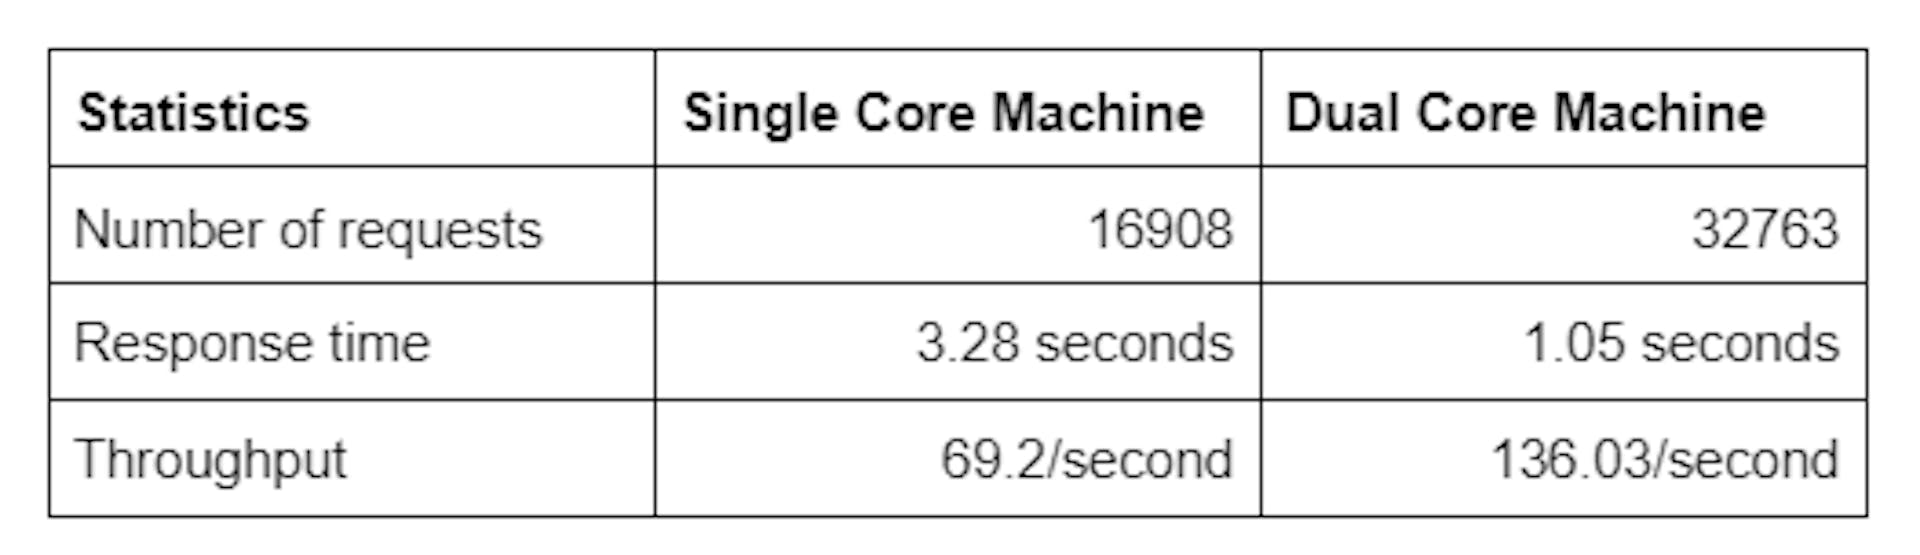 Comparison of single core and dual core machines with response times and throughput